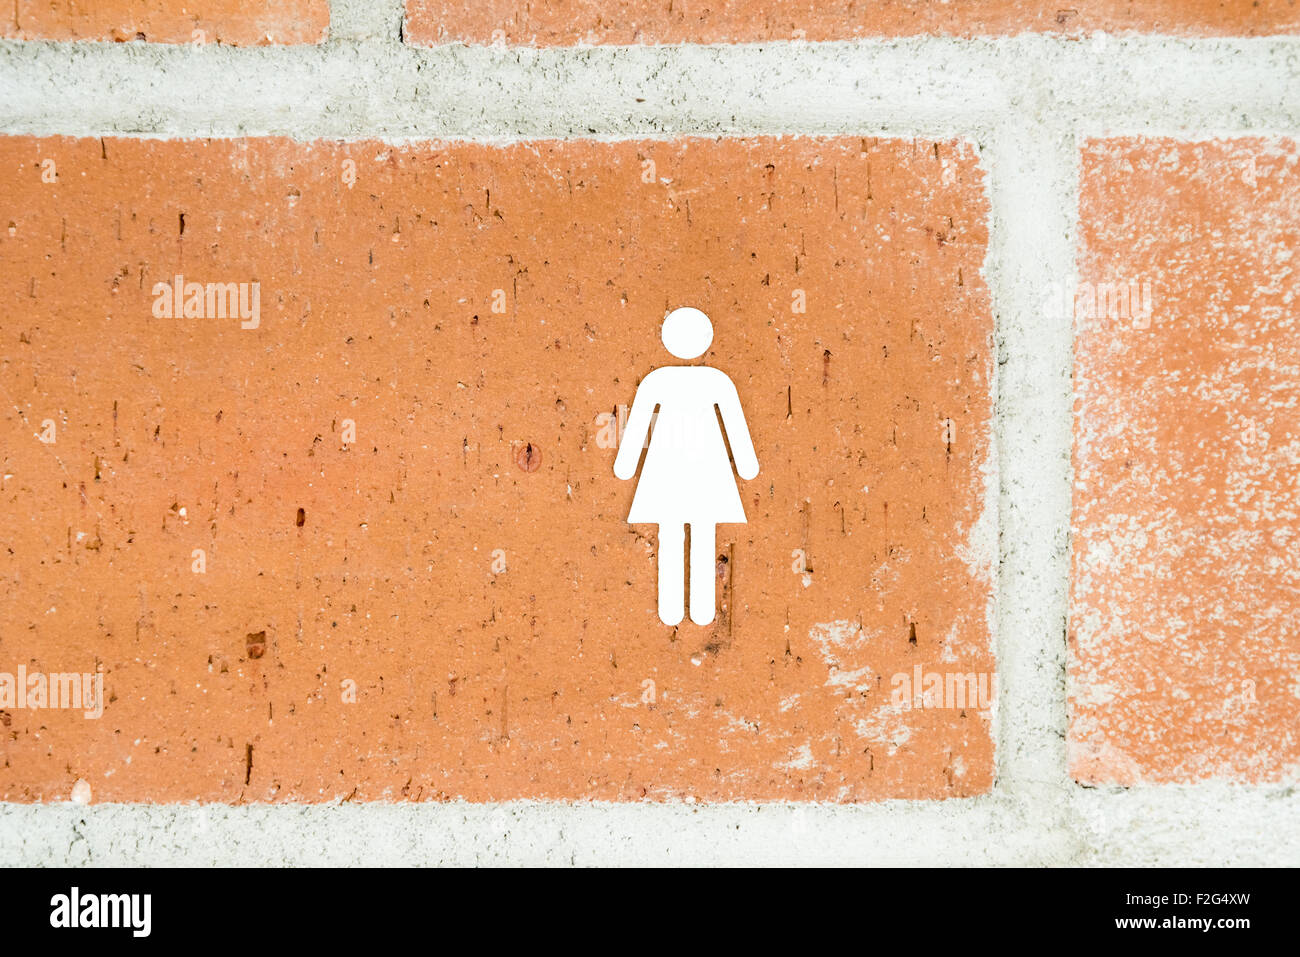 Public Restroom For Women Sign Stock Photo